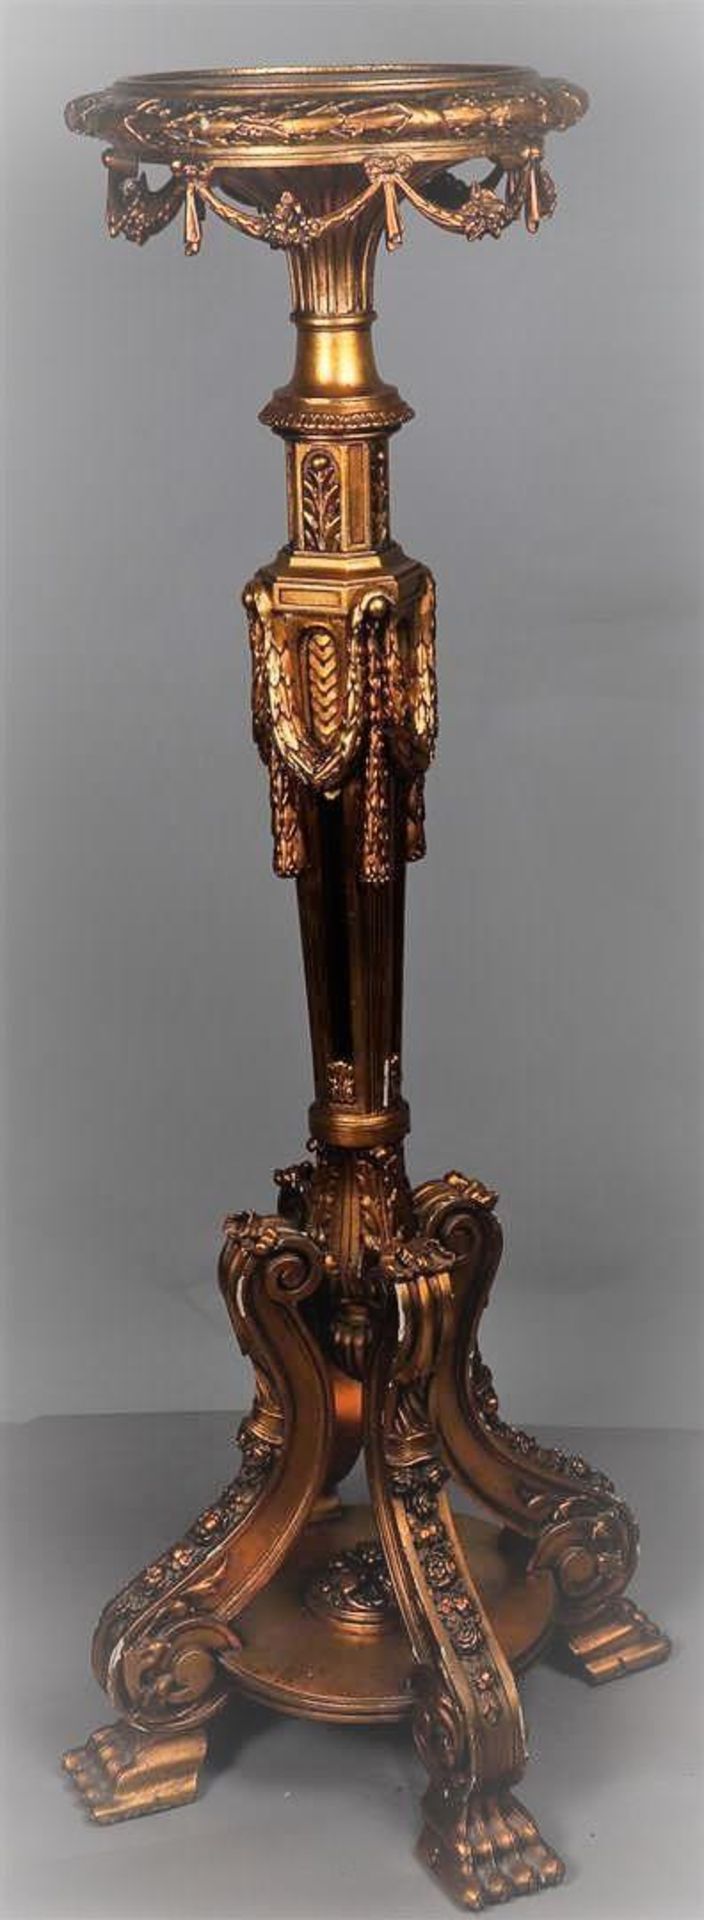 A richly decorated, bronzed wooden pedestal after an older example, 20th century.